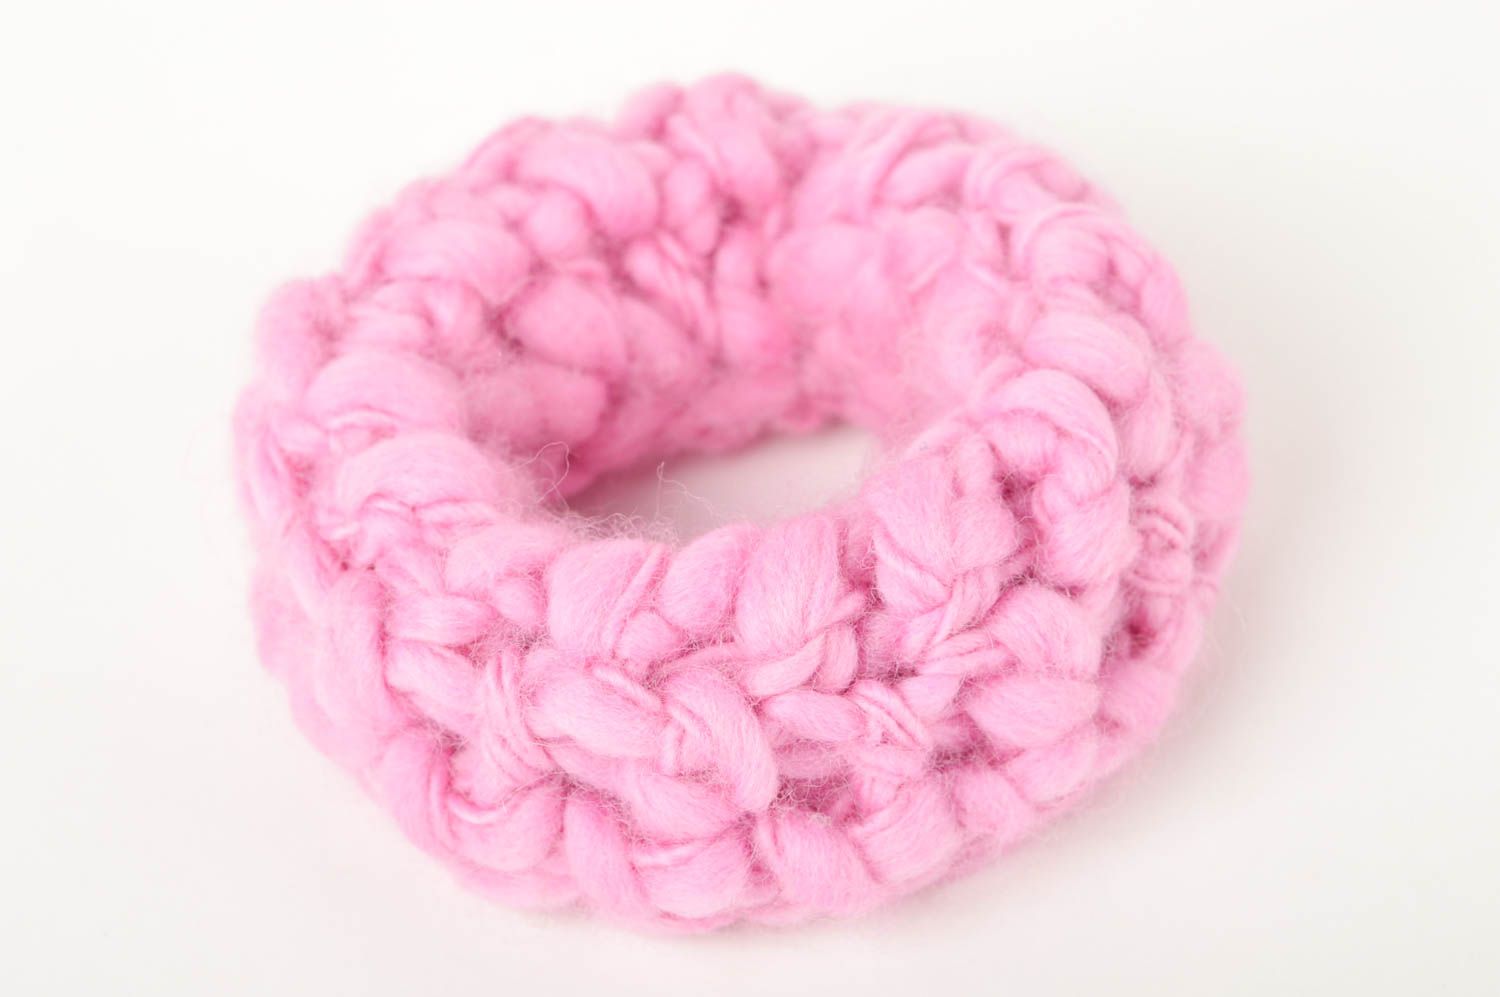 Stylish handmade knitted bracelet artisan jewelry designs gifts for her photo 2